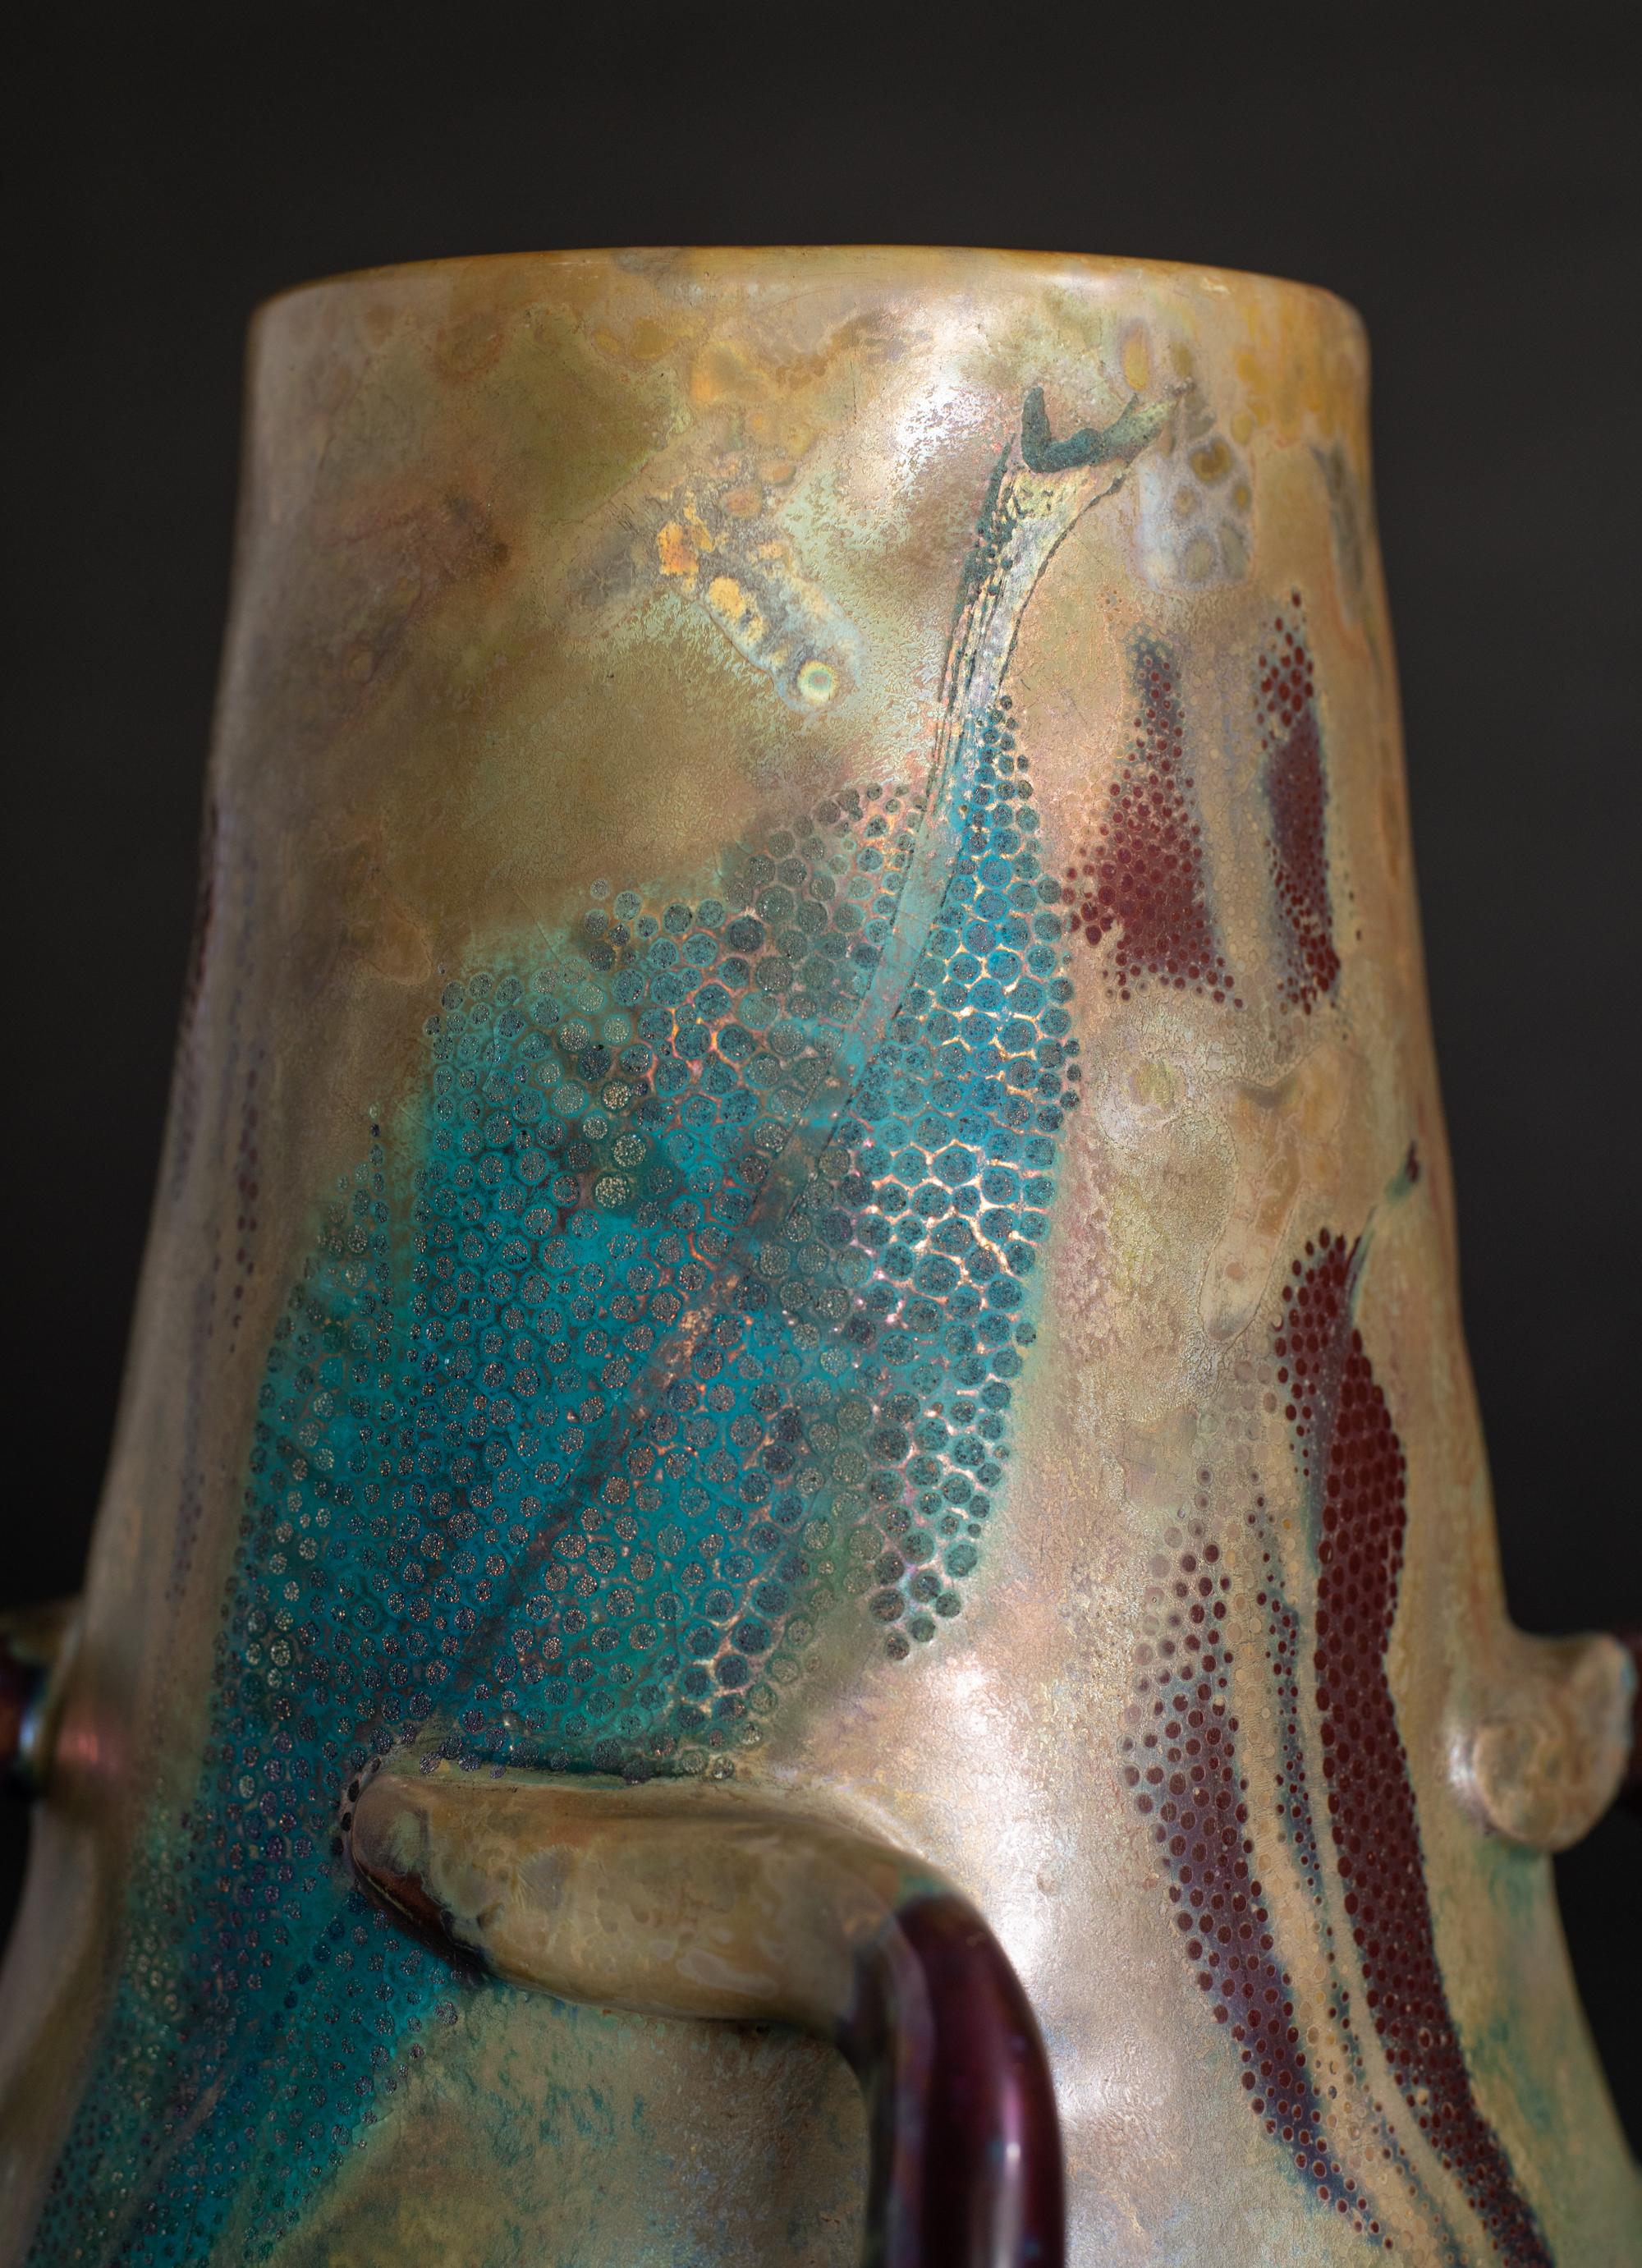 Blue Leaf Iridescent Art Nouveau Vase by Lucien-Levy Dhurmer for Clement Massier In Excellent Condition For Sale In Chicago, US